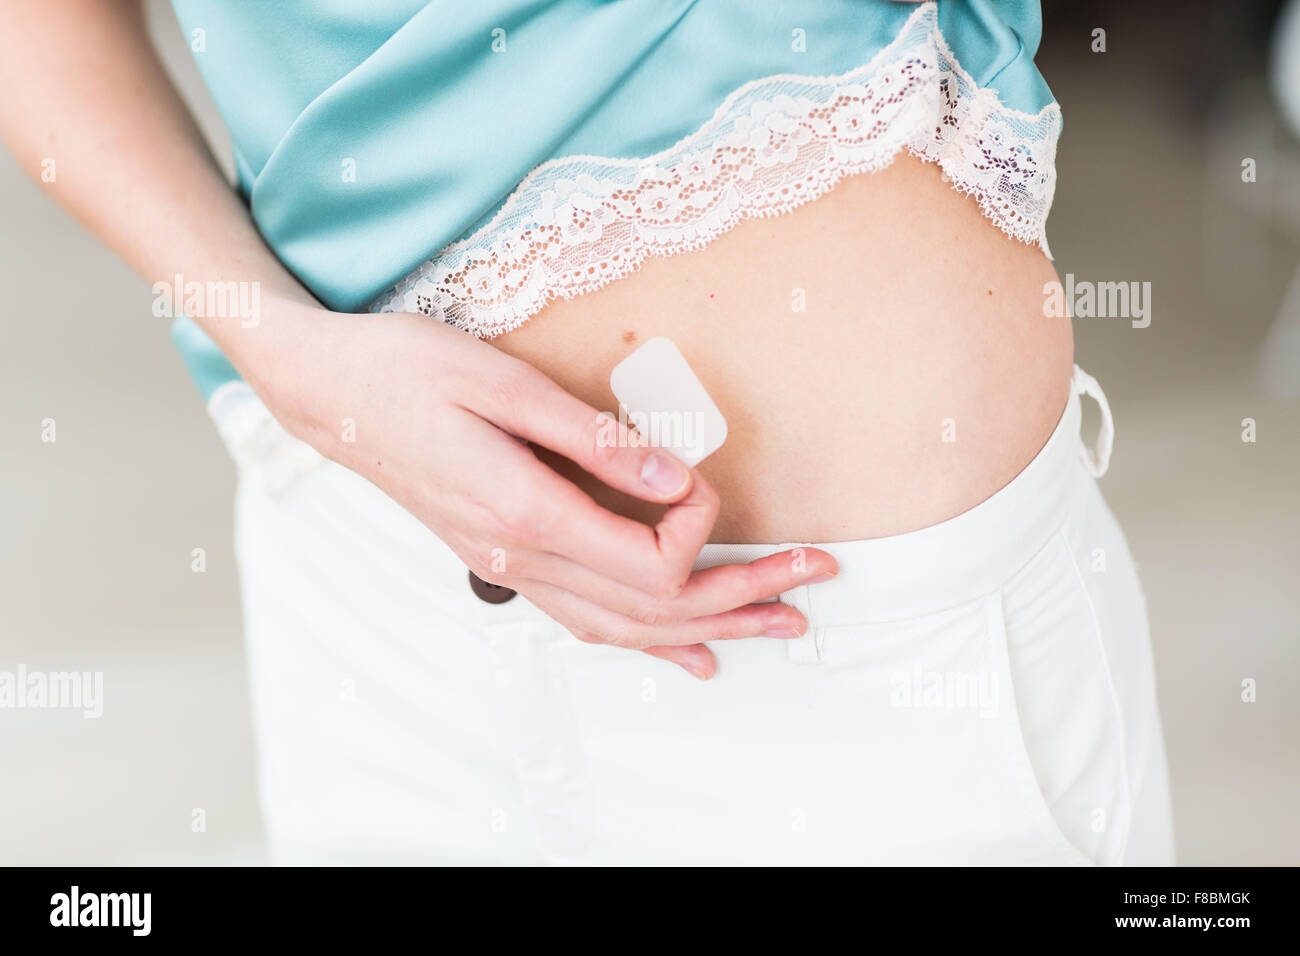 Woman applying a patch. Stock Photo